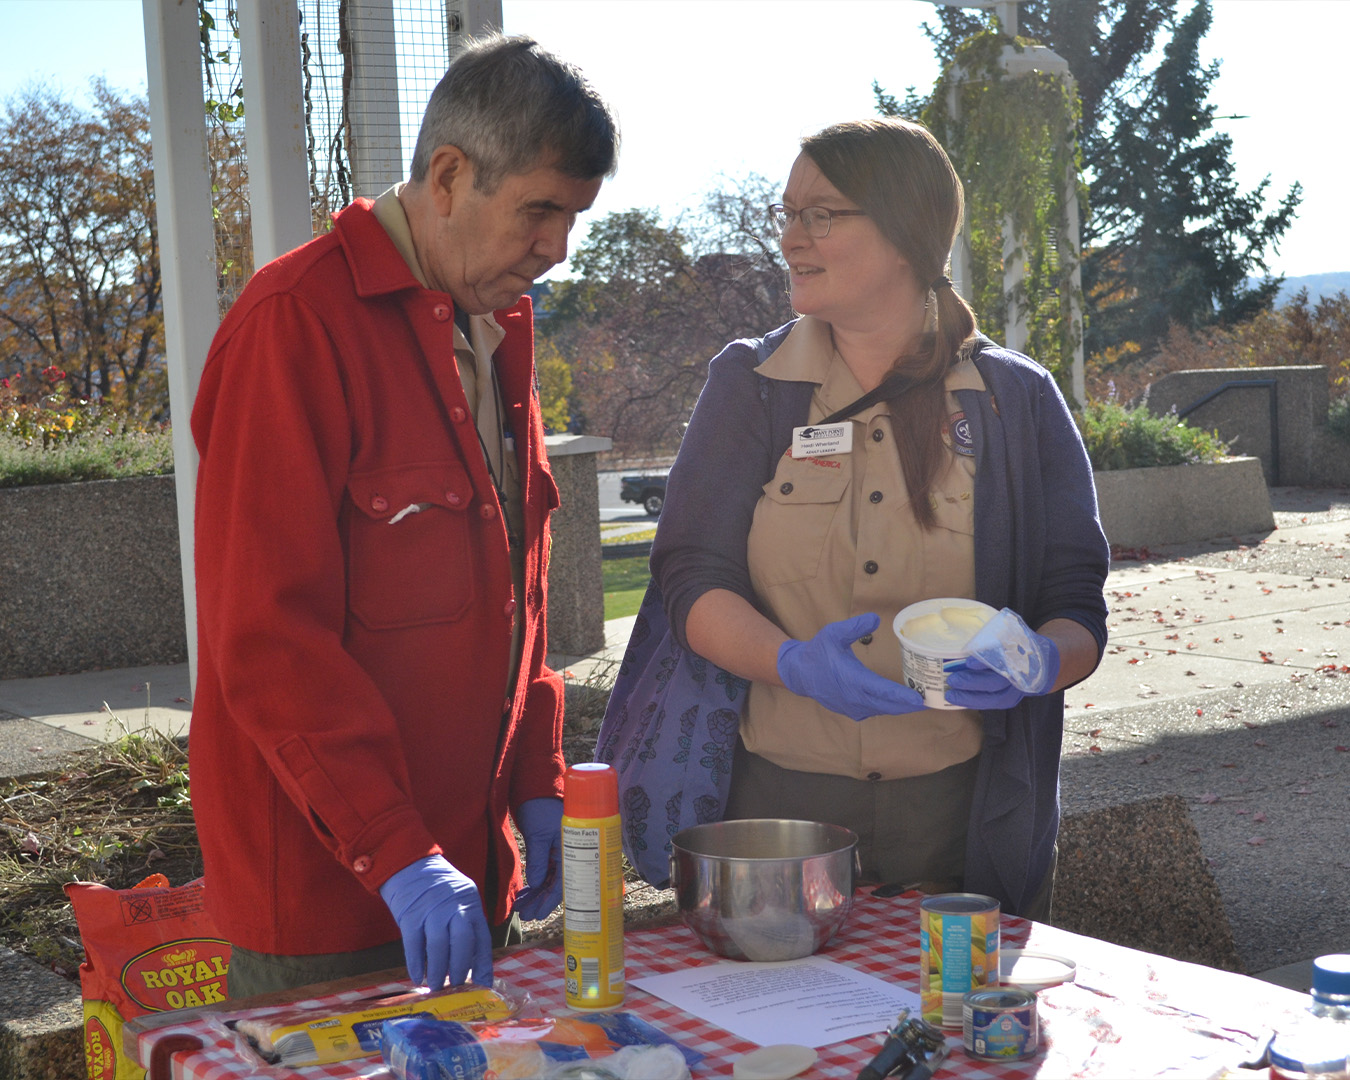 Two adults talk outdoors while surrounded by various cooking ingredients